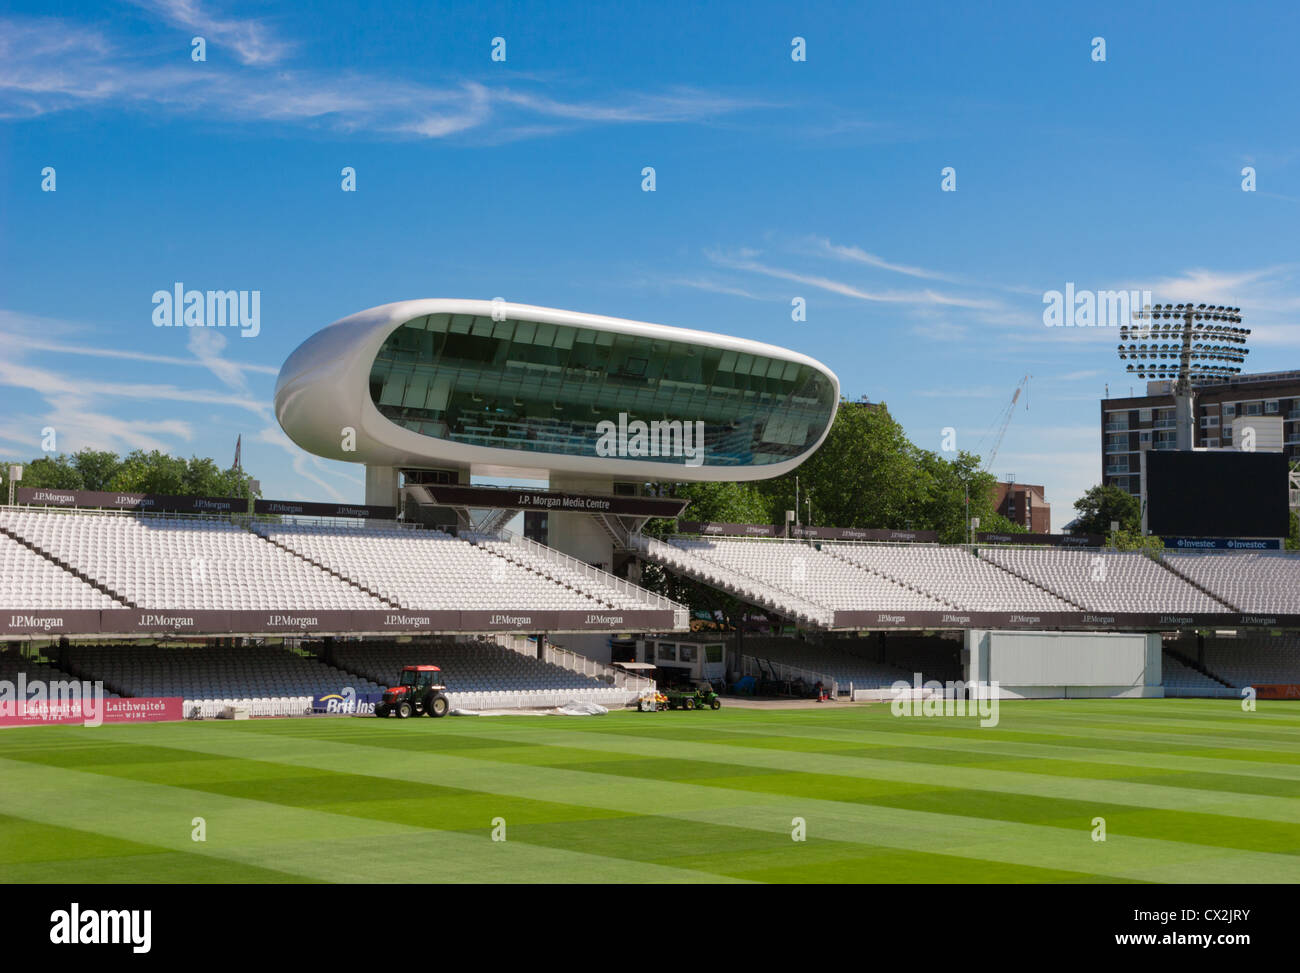 The Lord's Media Centre at Lord's Cricket ground, St John's Wood, North London designed by Jan Kaplický Stock Photo